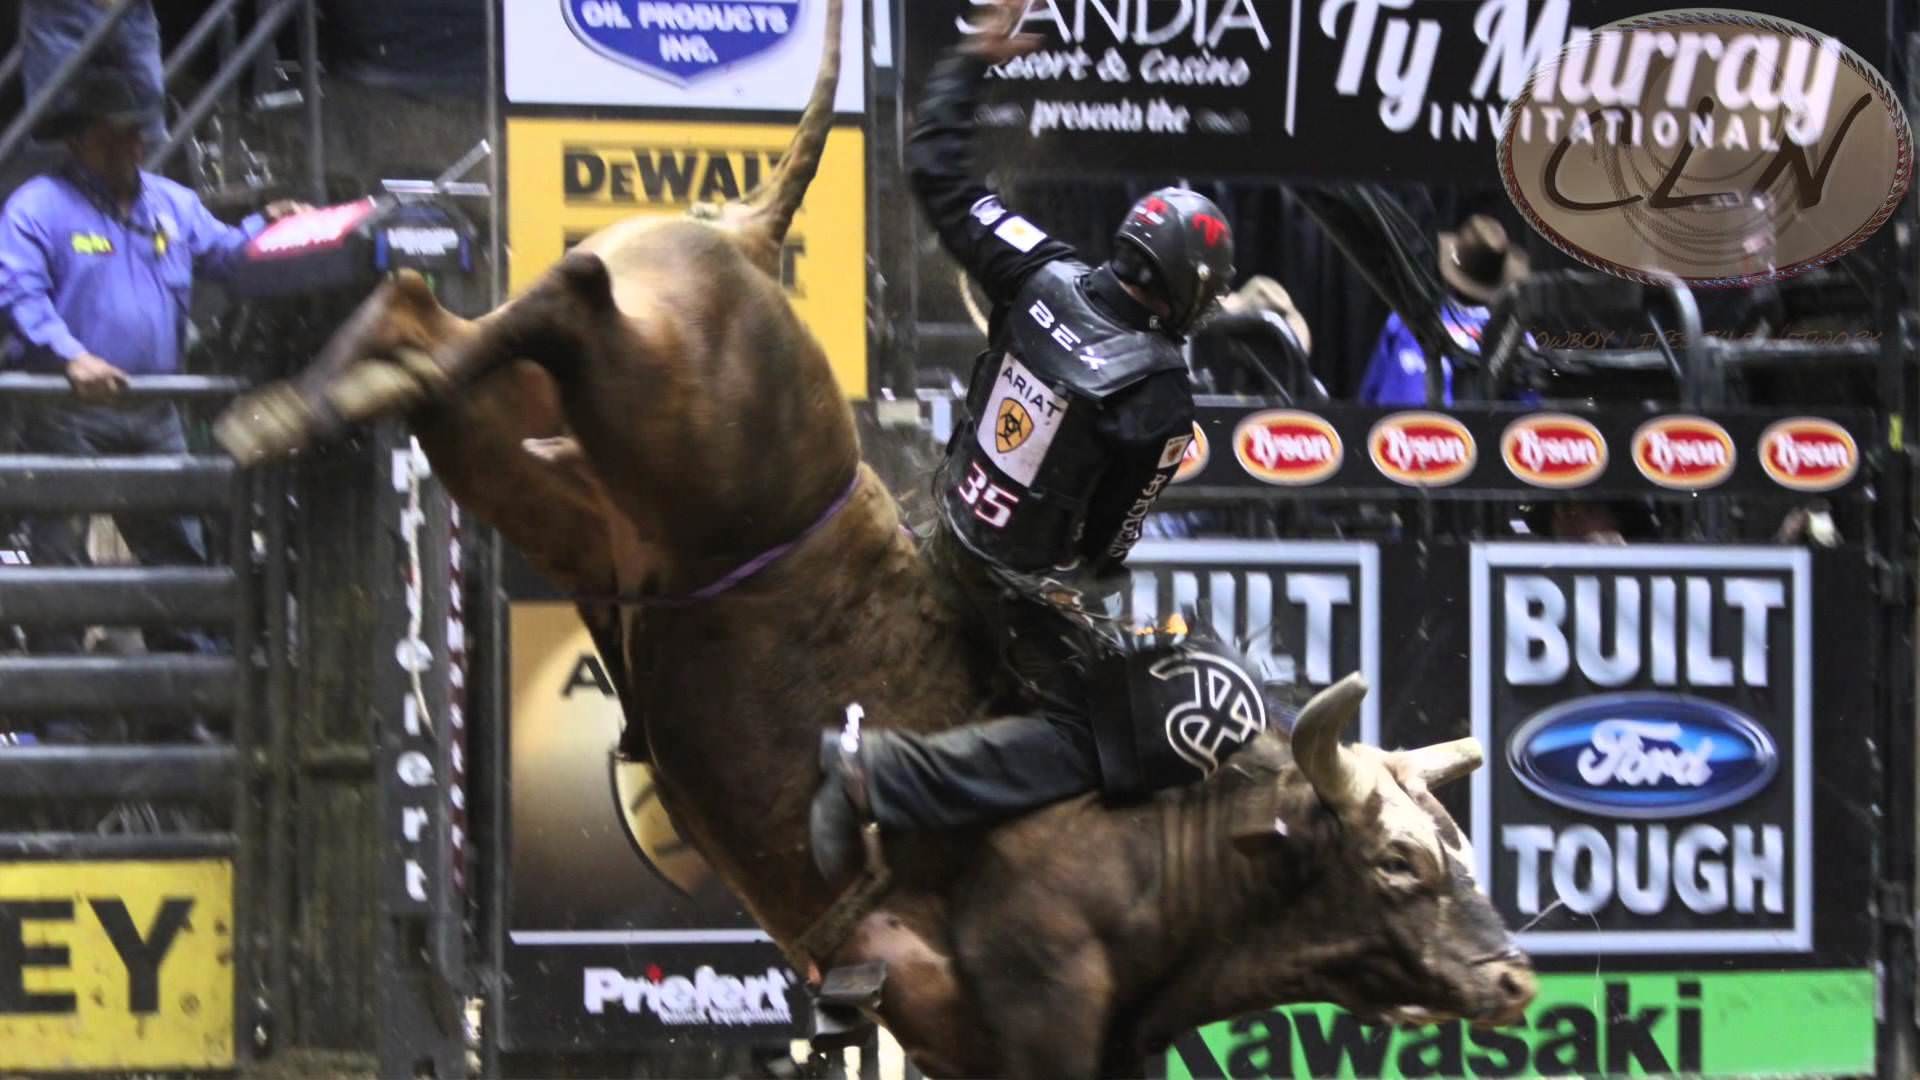 1920x1080 2014 PBR Built Ford Tough Series: Ty Murray Invitational in Albuquerque,  New Mexico